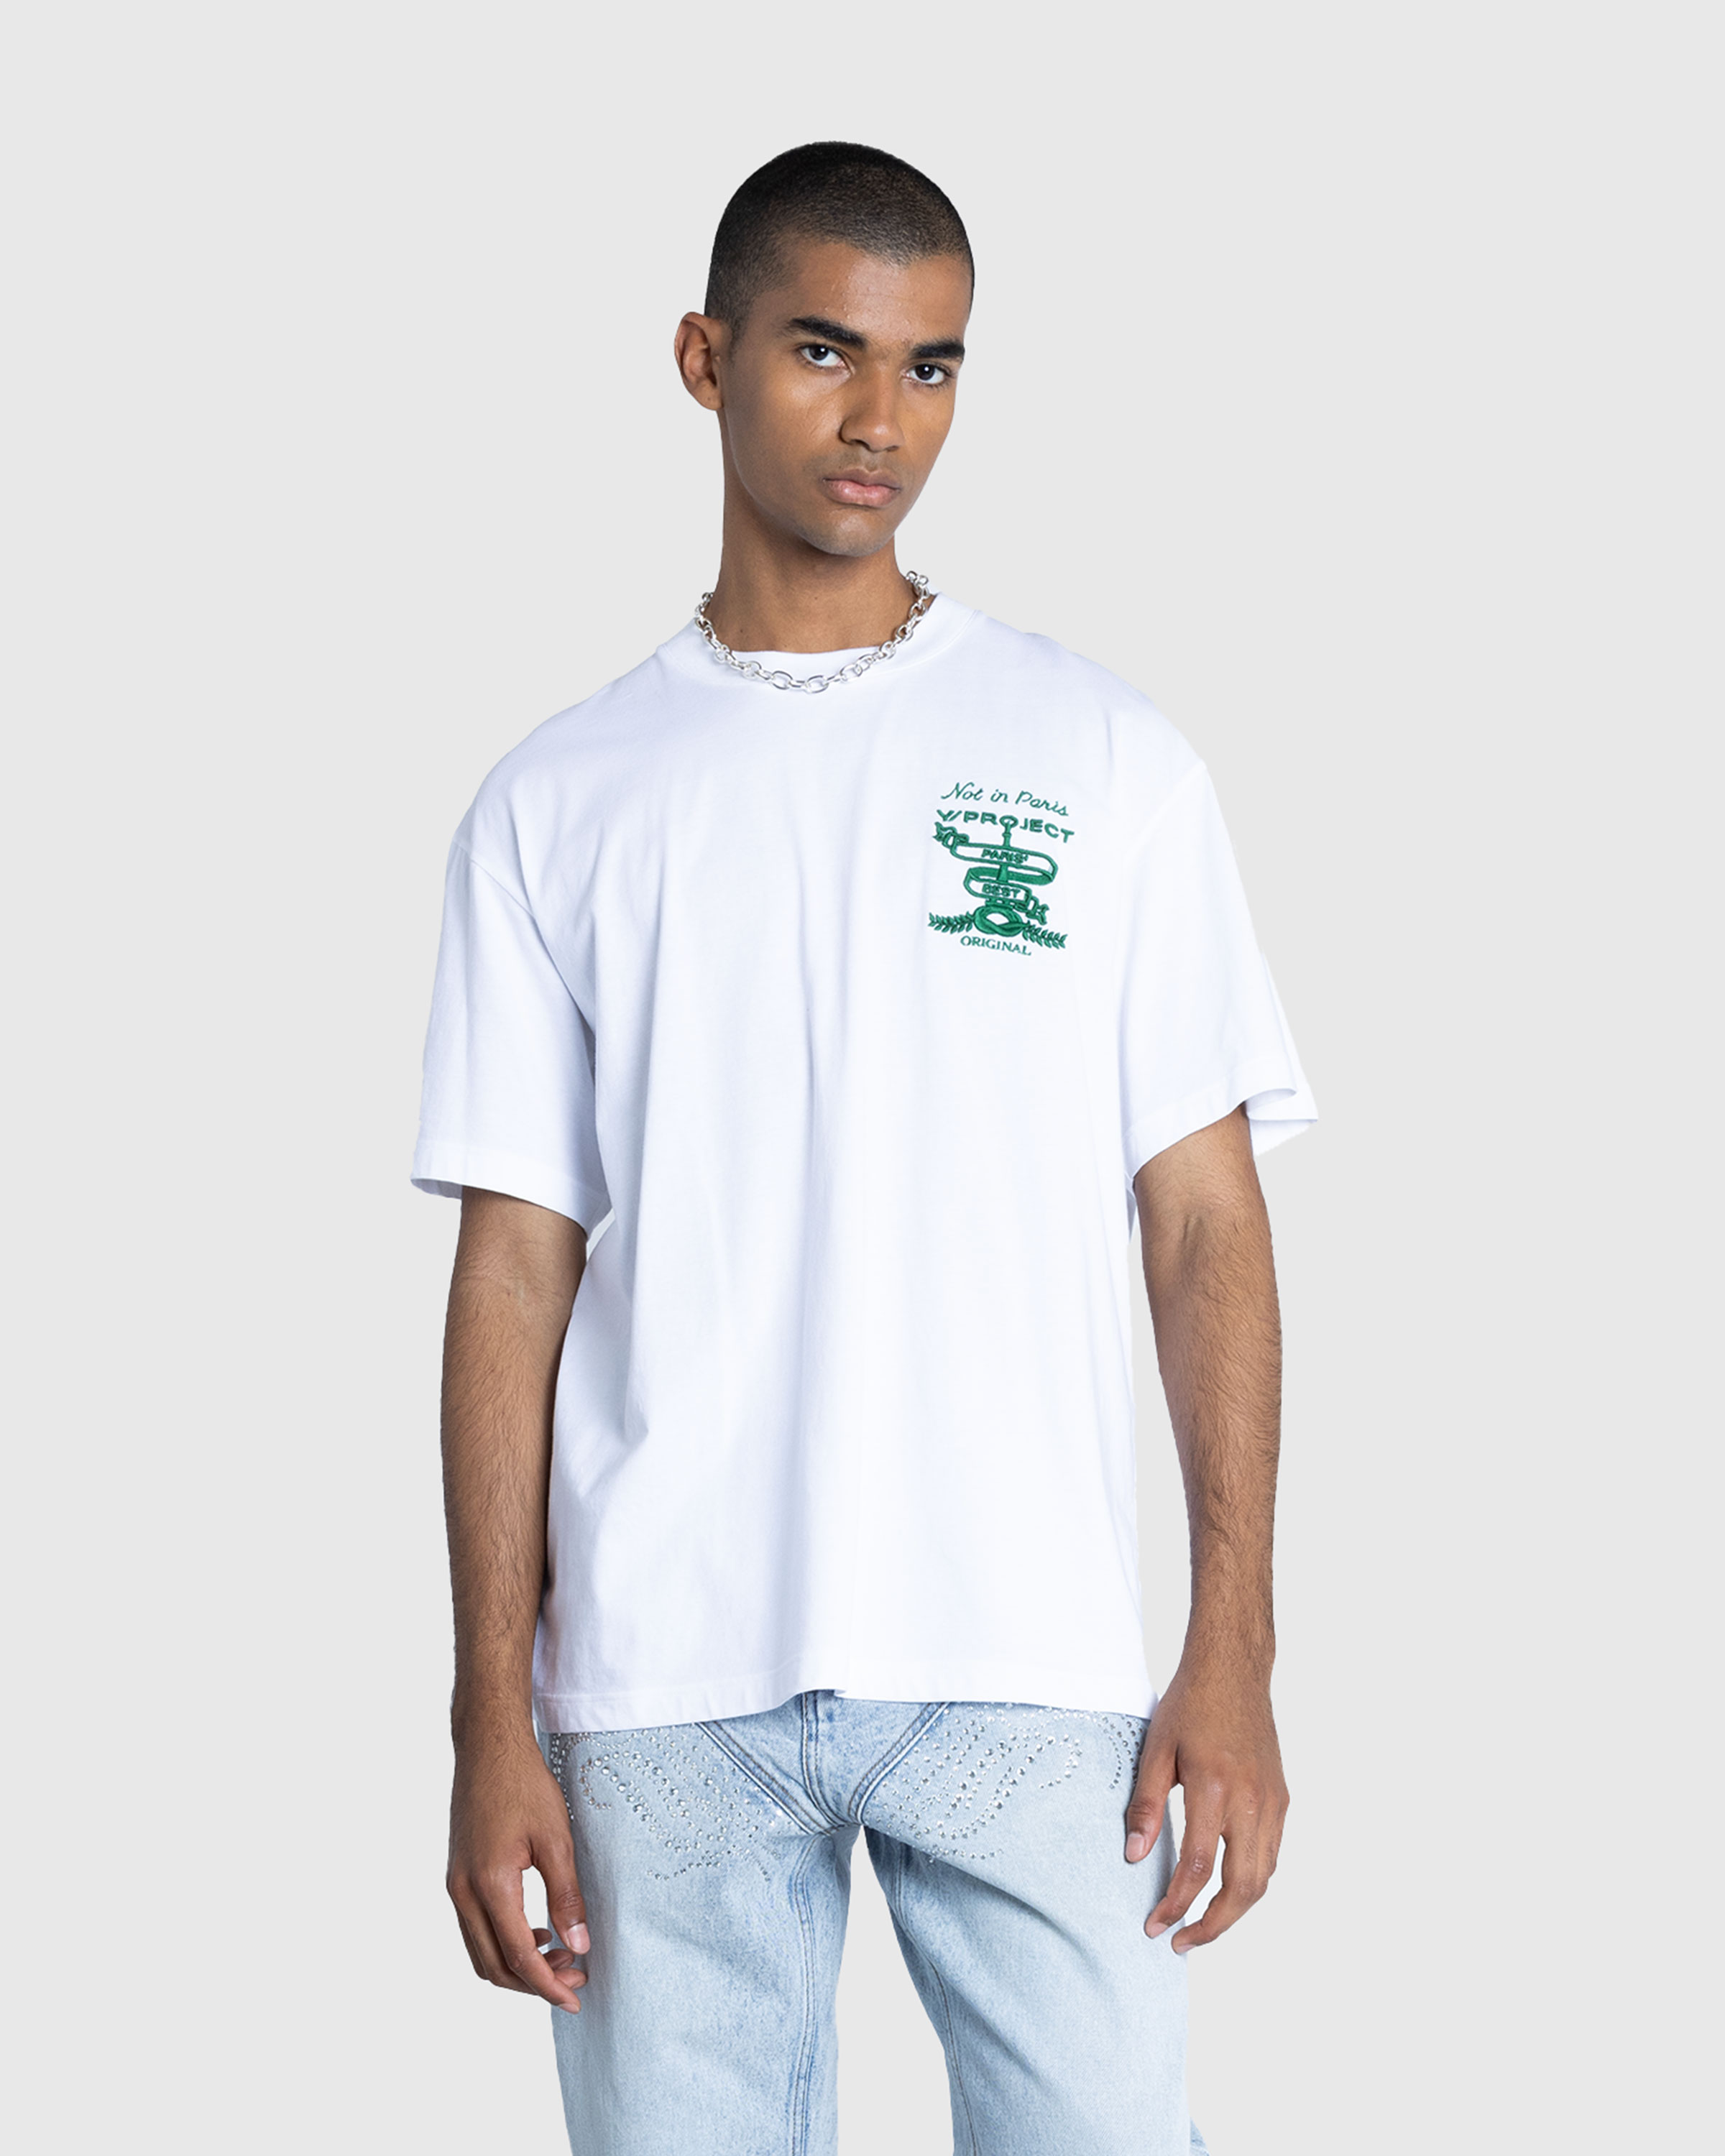 Y/Project x Highsnobiety – Not In Paris T-Shirt White - T-Shirts - White - Image 2